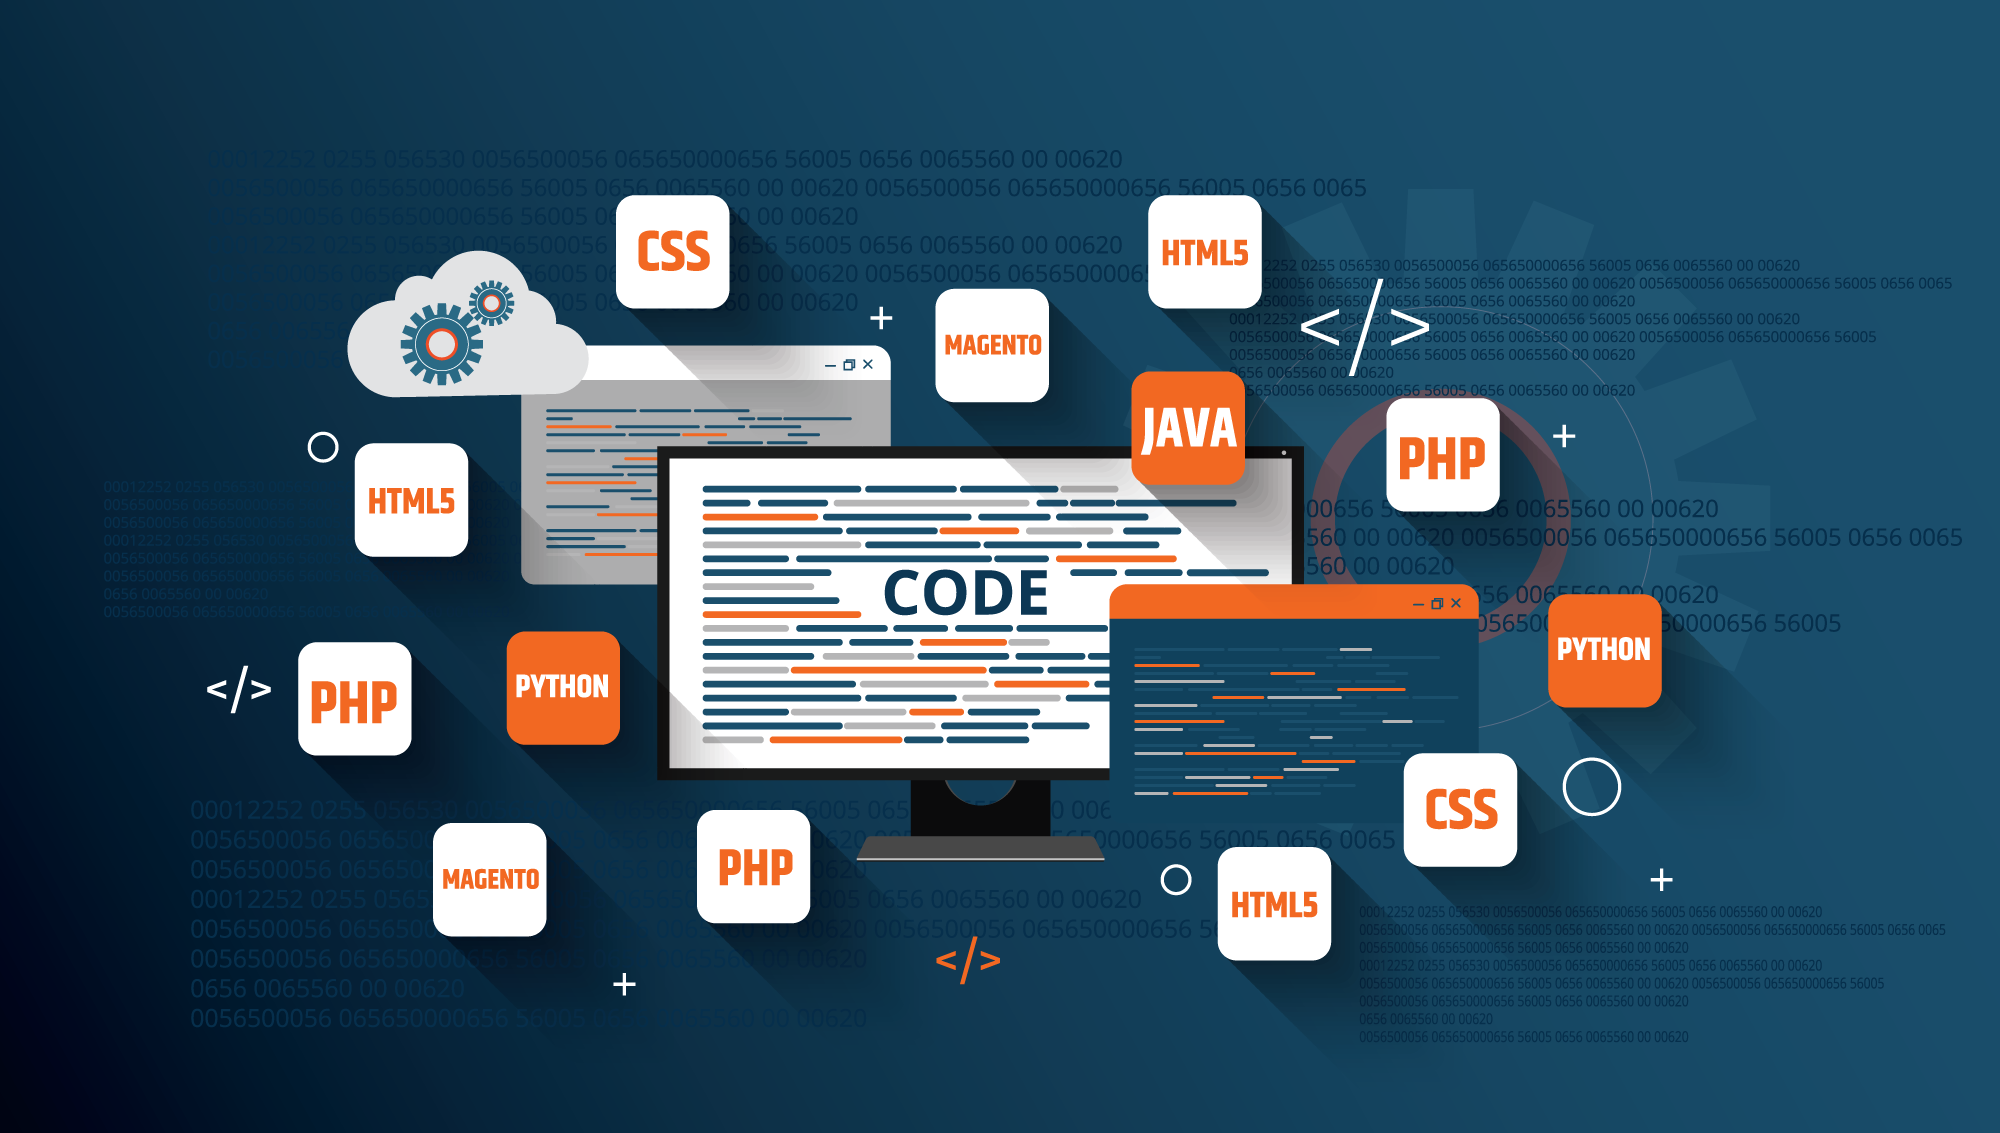 Conclusion: Future-proof Your Web Design with HTML5 and CSS3